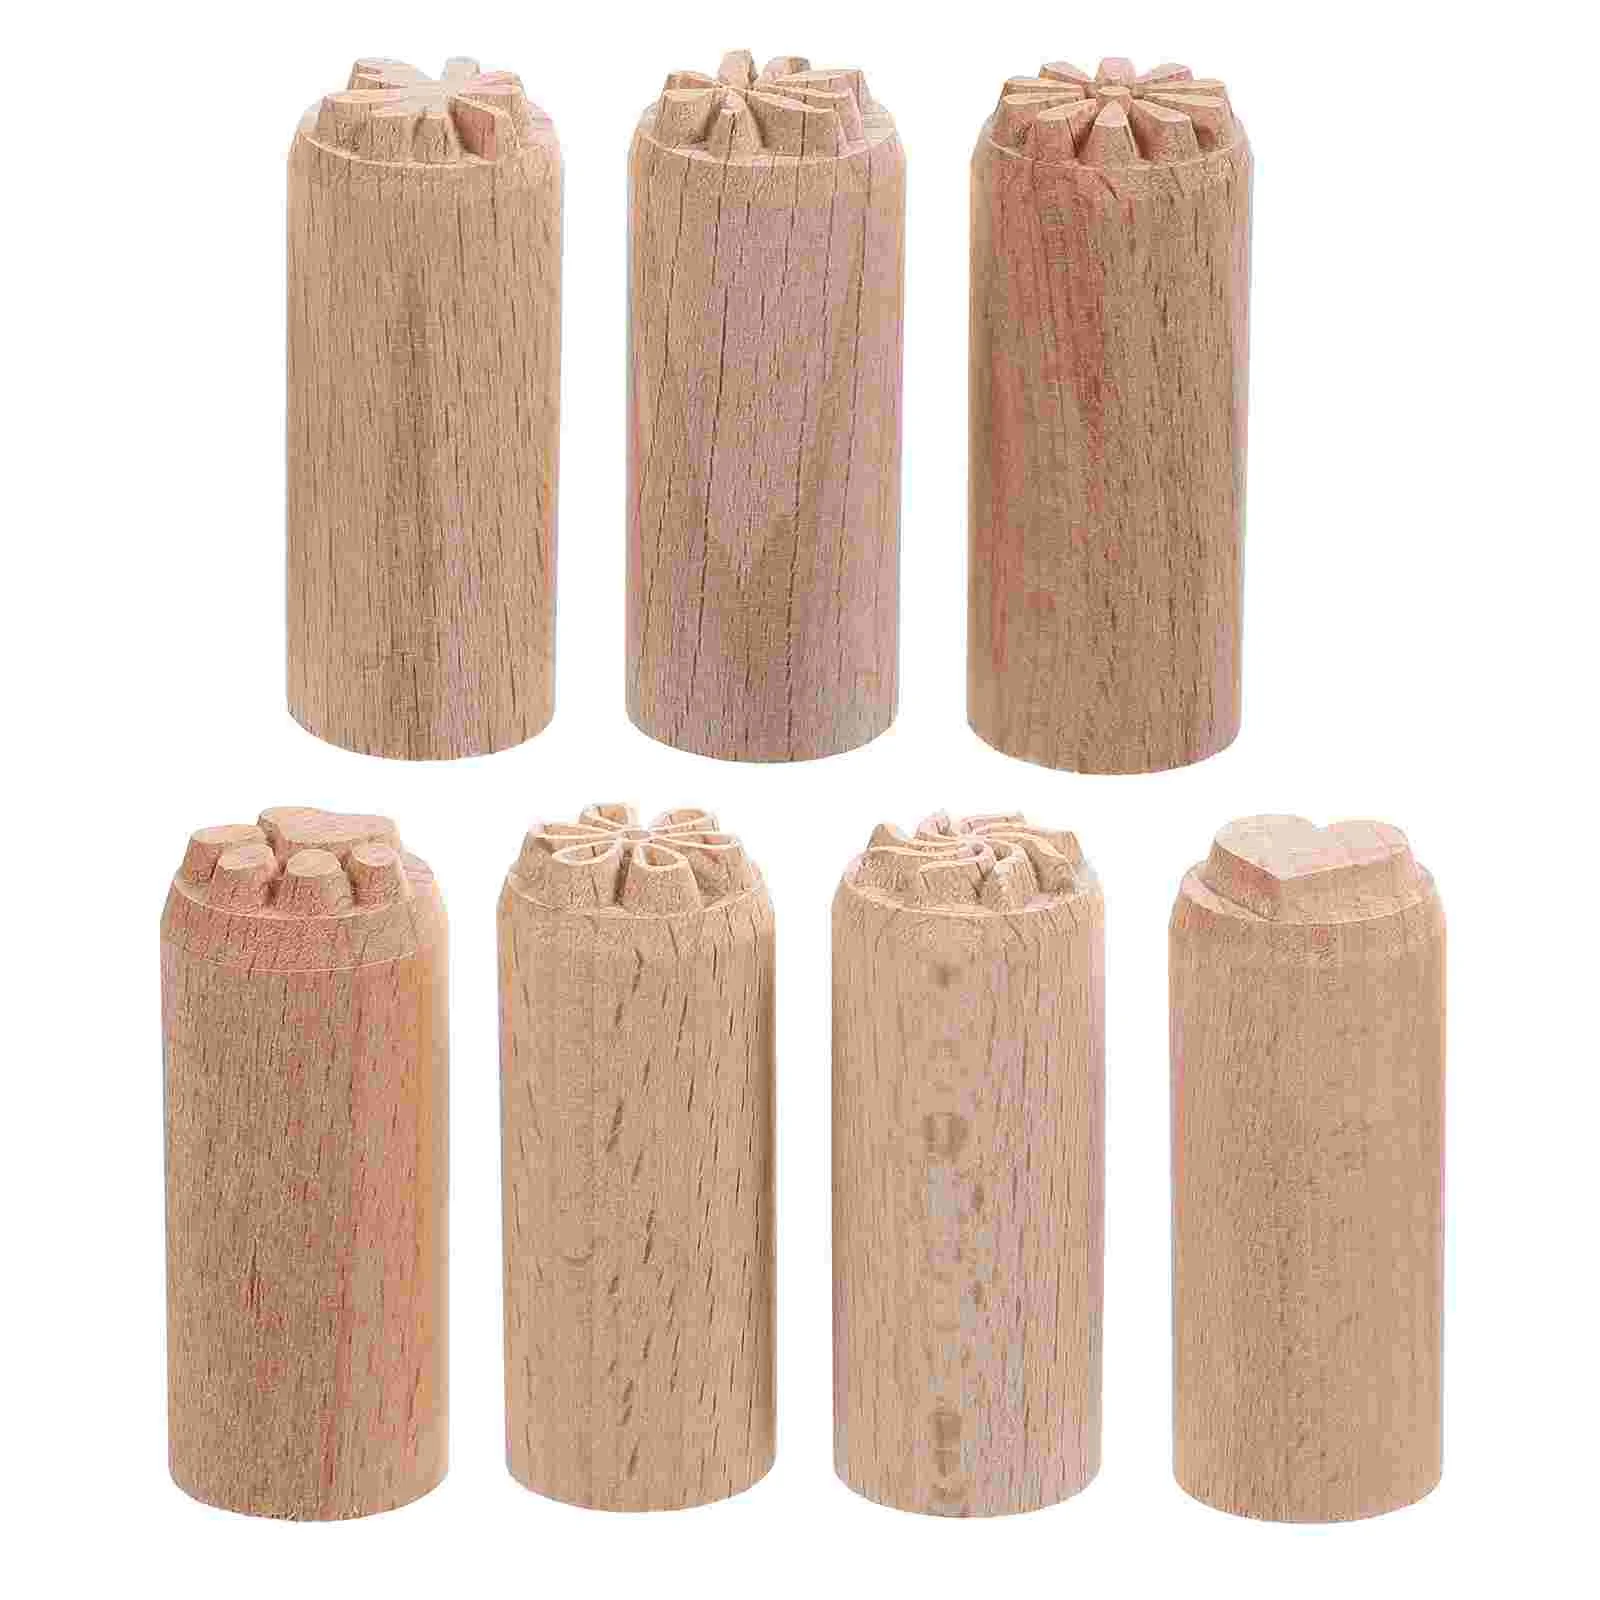 

2cm Wooden Stamp Pottery Tools Stamps Hand Carved Craft Accessories DIY Clay Printing Blocks